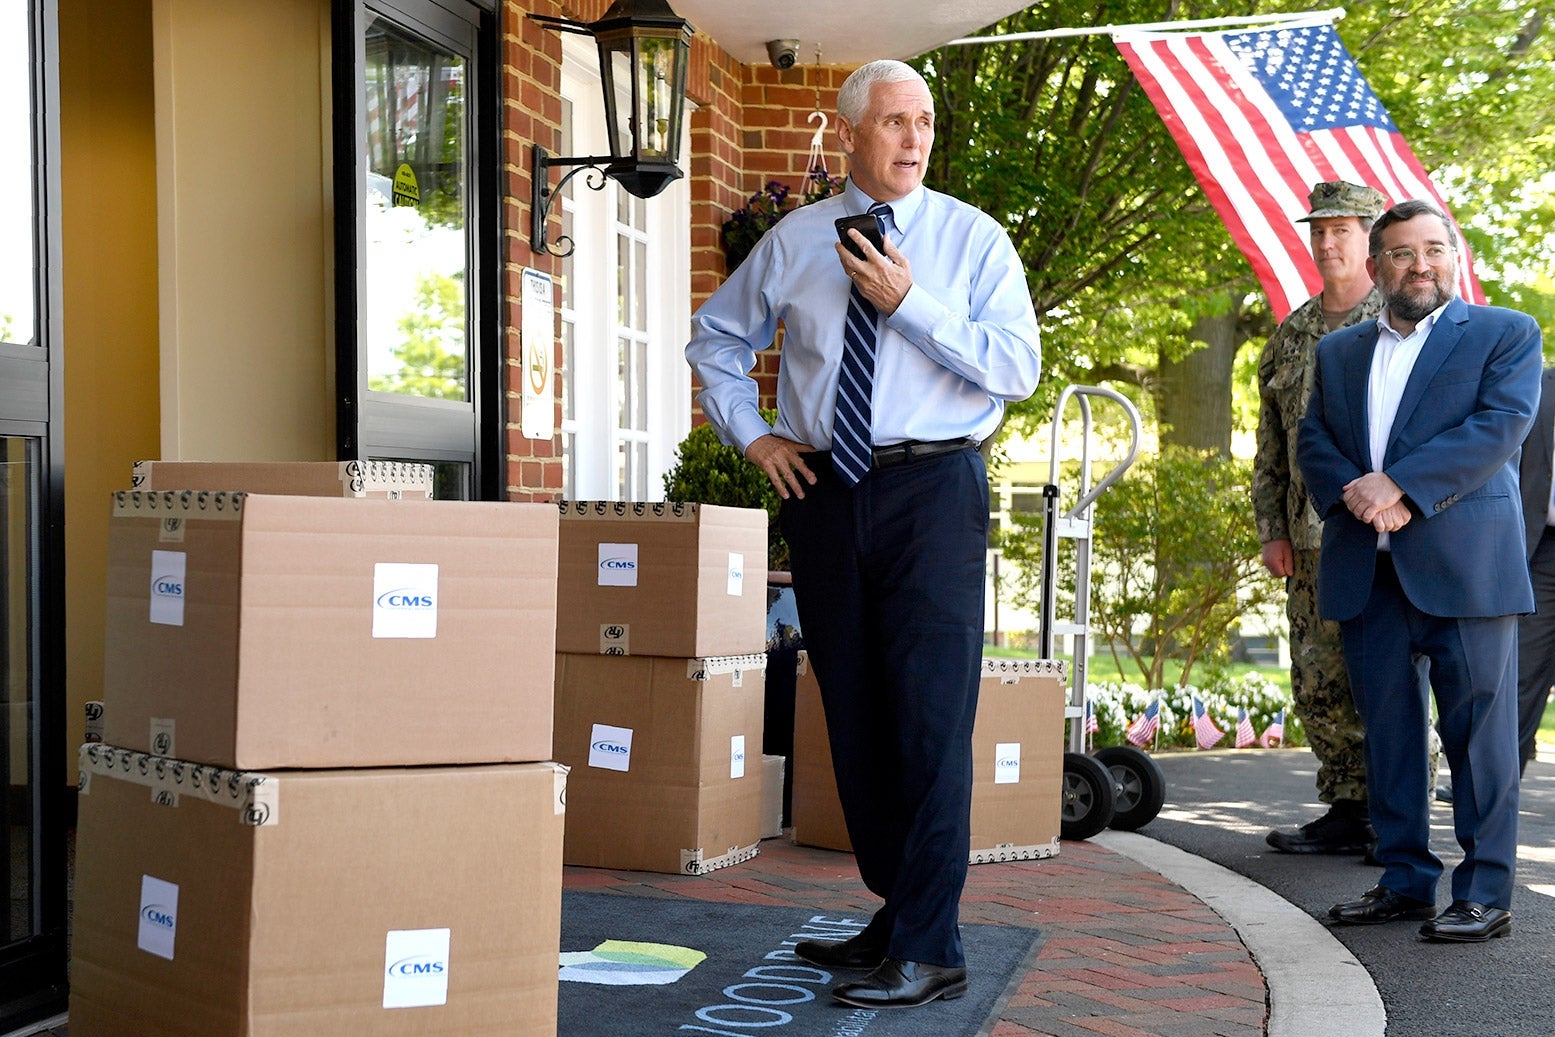 Pence, wearing a shirt and tie, speaks into a phone while standing next to piles of boxes.